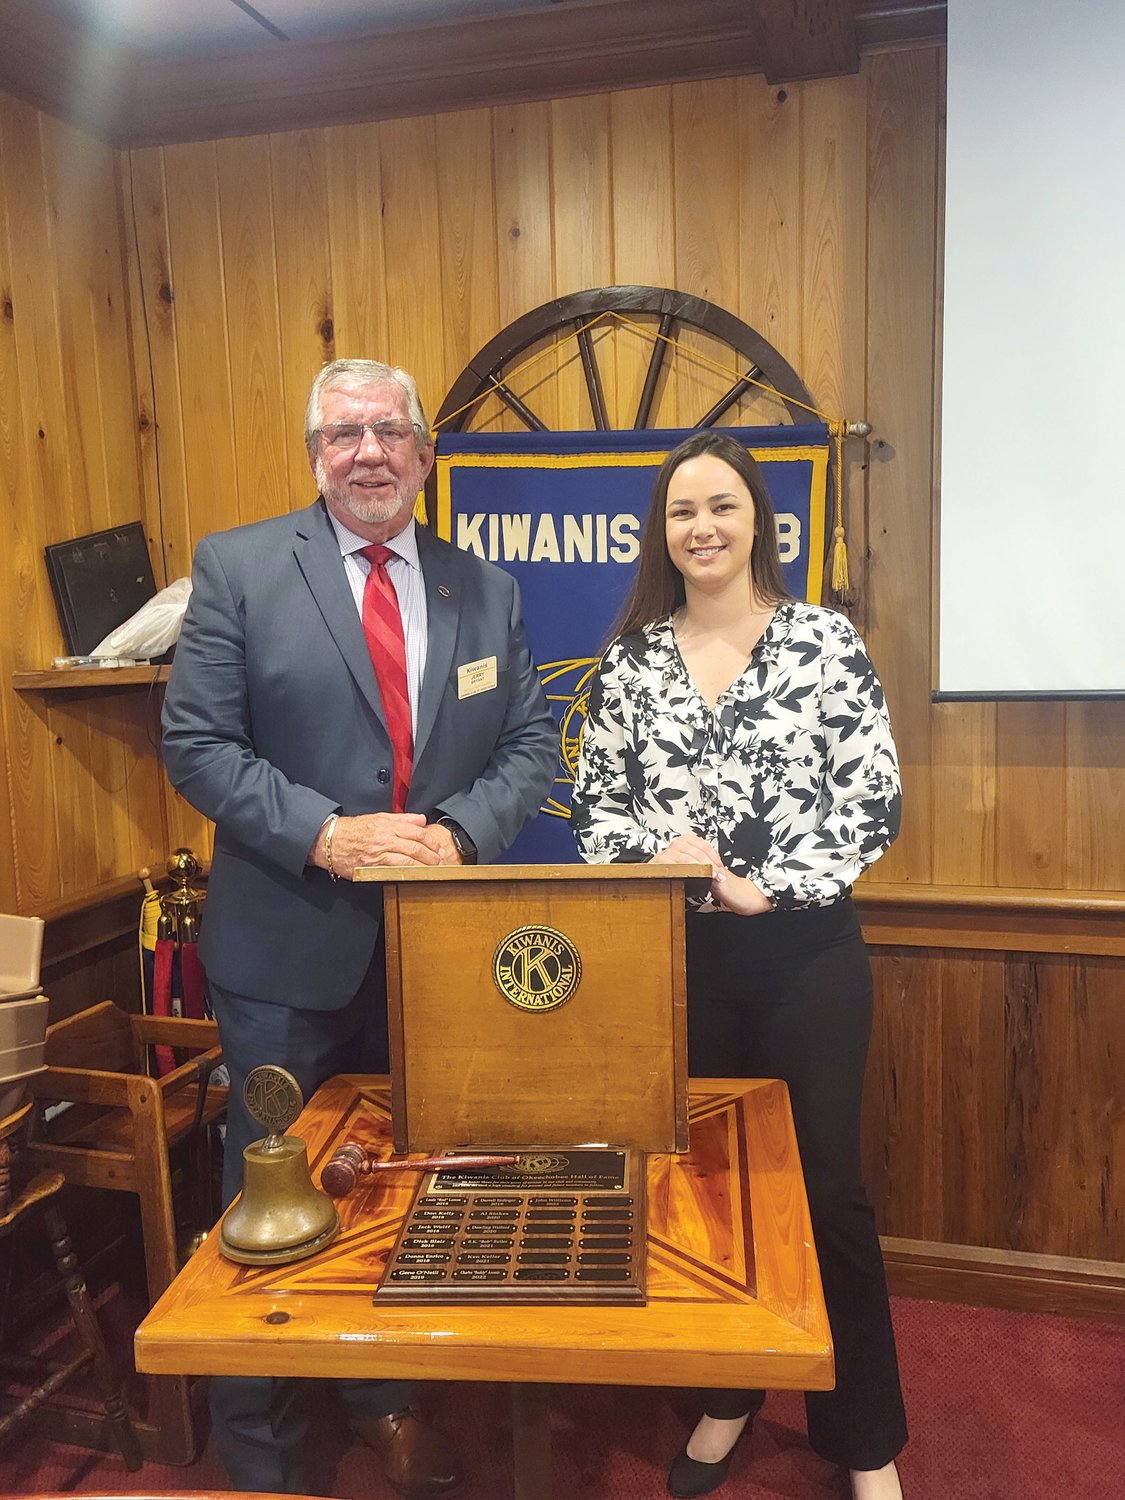 Kaylee Tuck (right) with Kiwanis presenter Jerry Bryant (left).